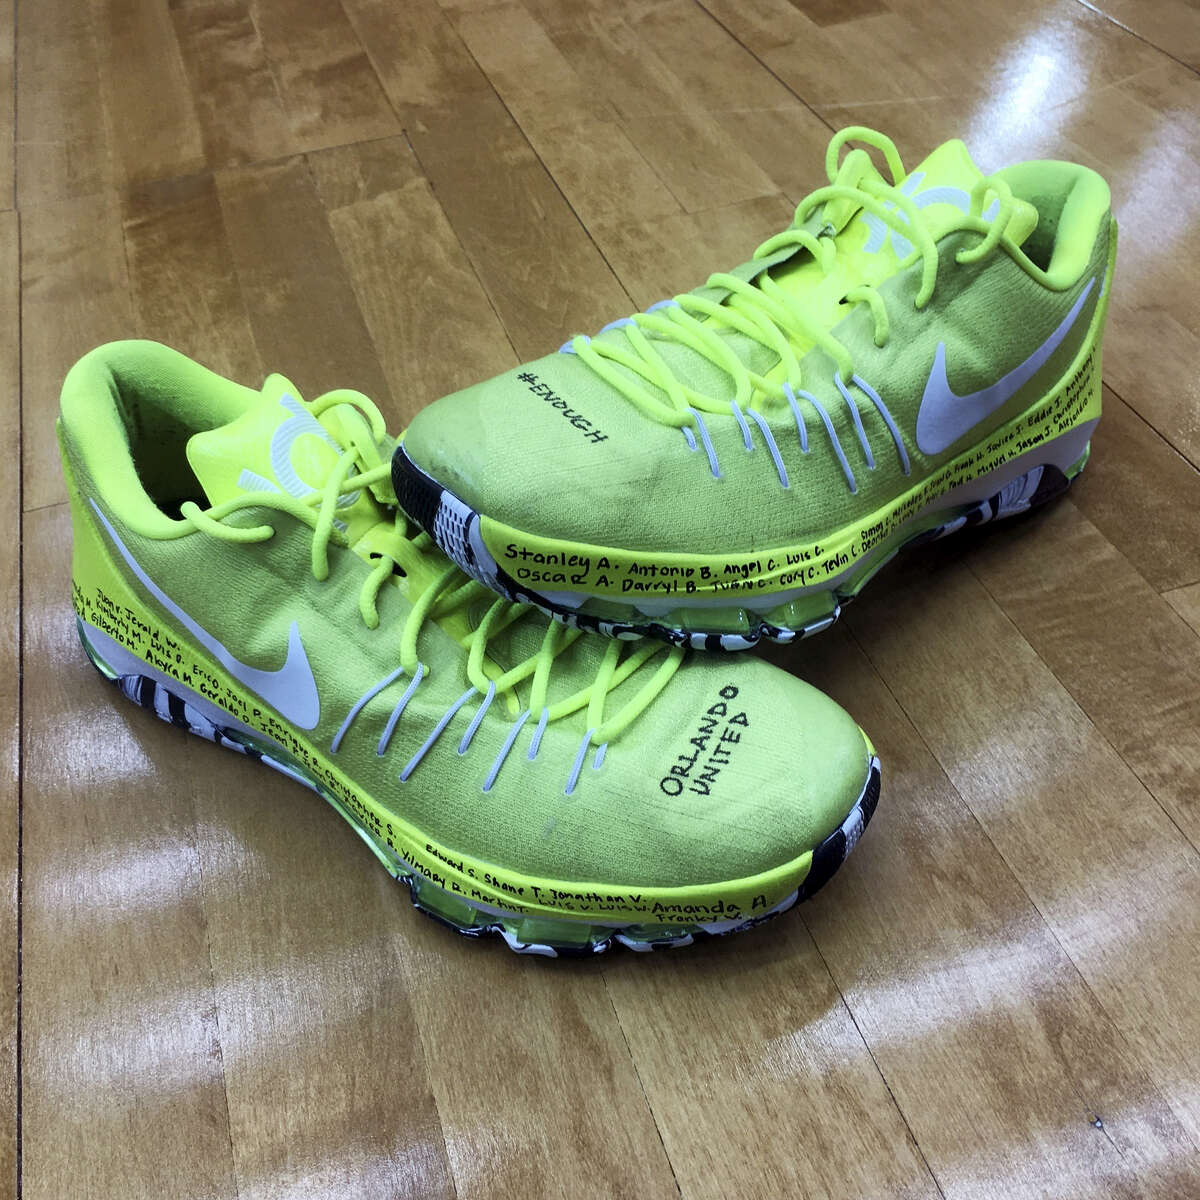 This undated photo provided by the Seattle Storm shows the shoes Breanna Stewart wore June 16, 2016, in the Storm’s game against the Dallas Wings. The shoes will be auctioned to benefit the OneOrlando fund.